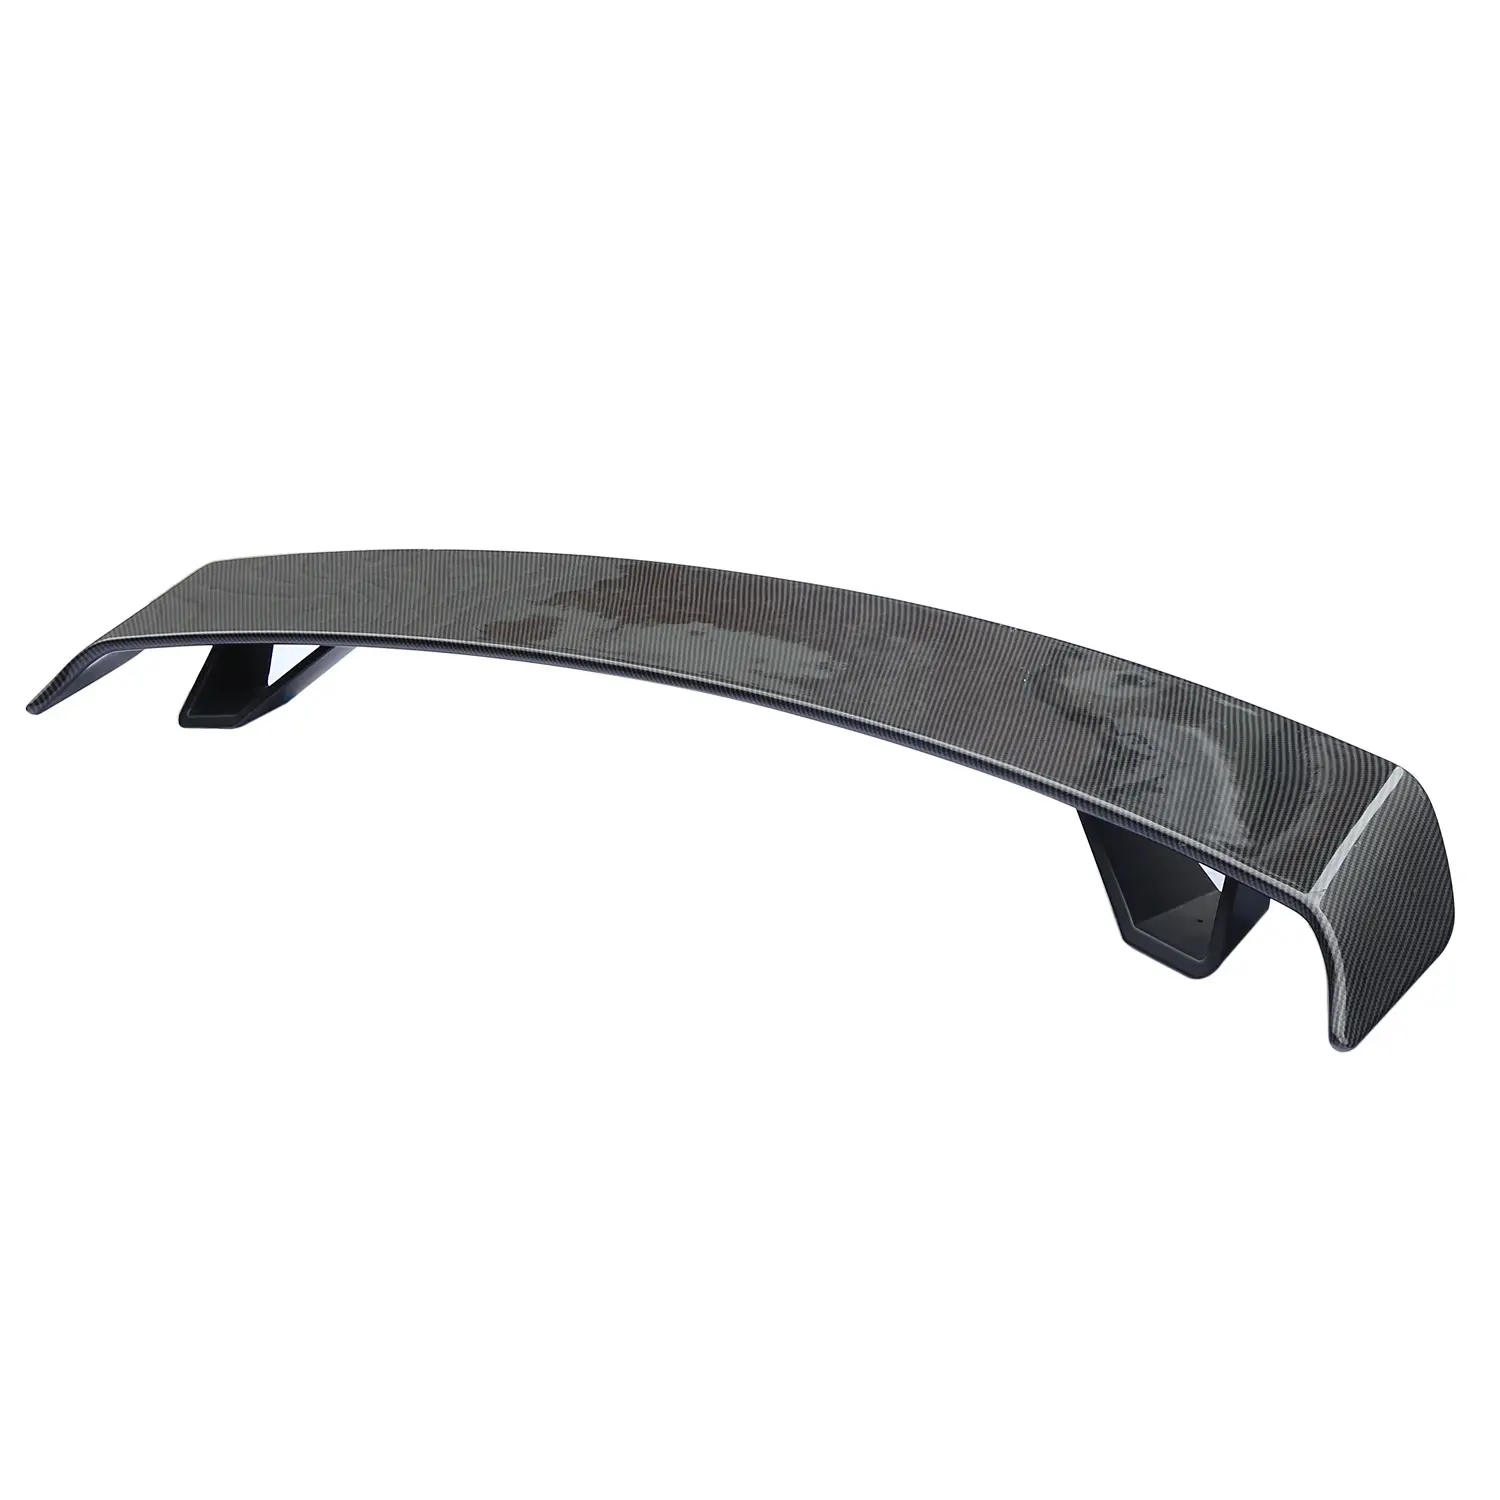 Universal modification of large tail wing sedan for automobiles, universal GT fixed wing spoiler